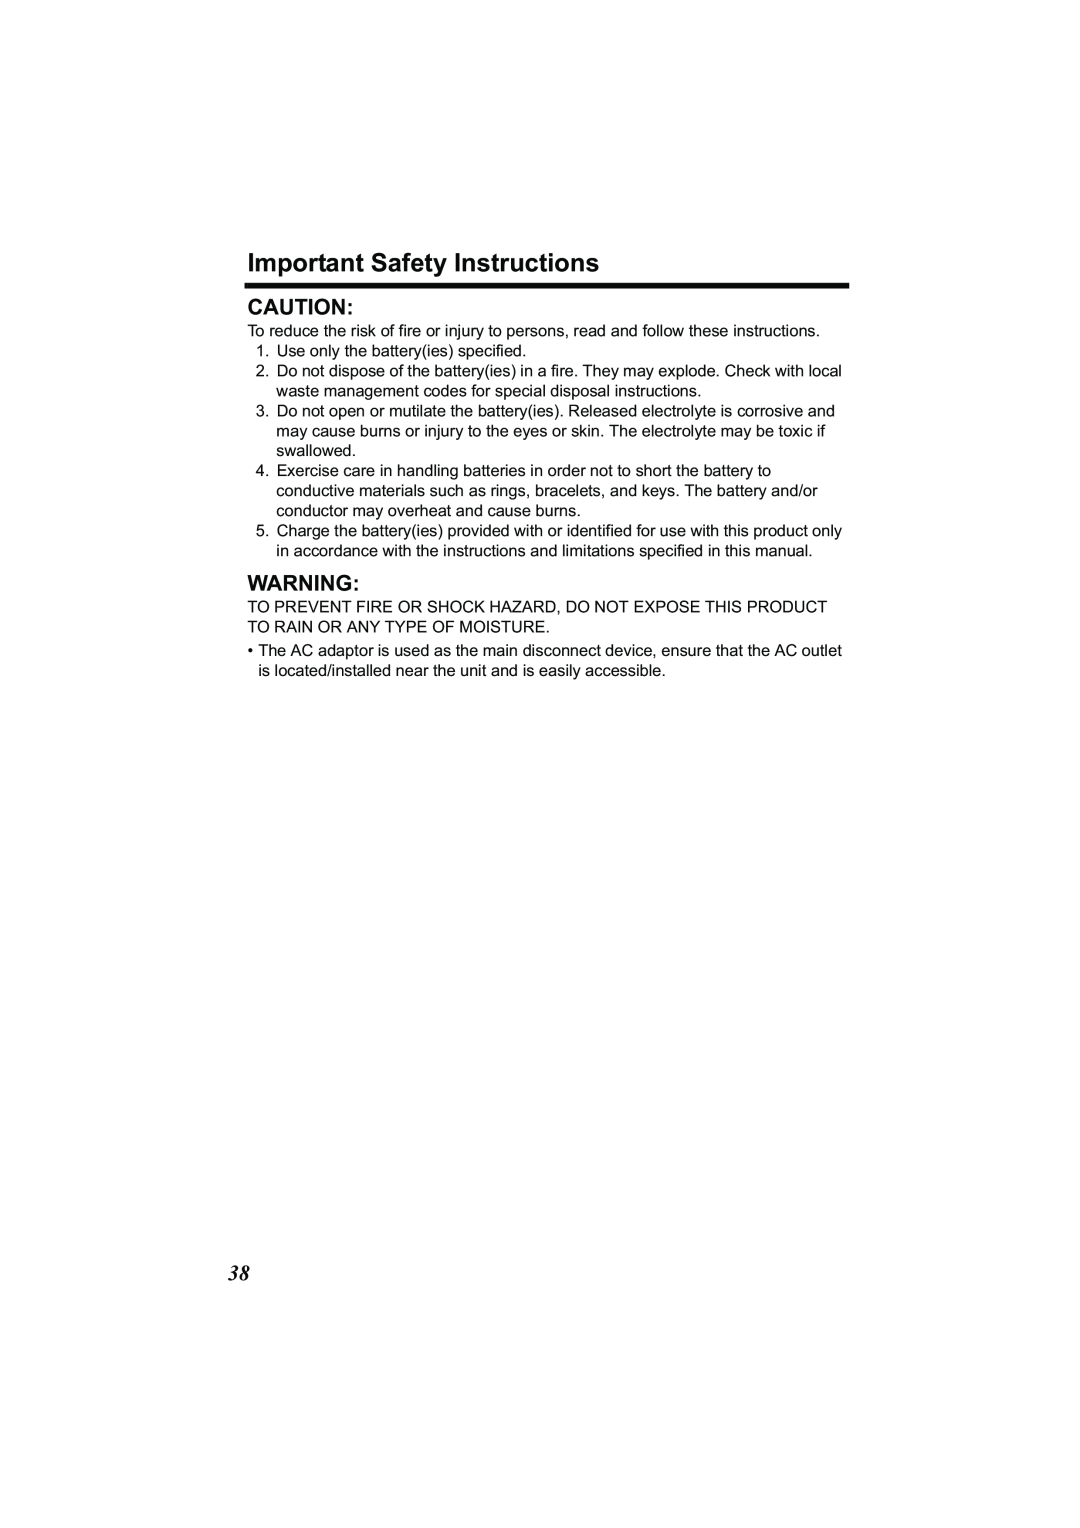 Panasonic Acr14CF.tmp manual Important Safety Instructions 